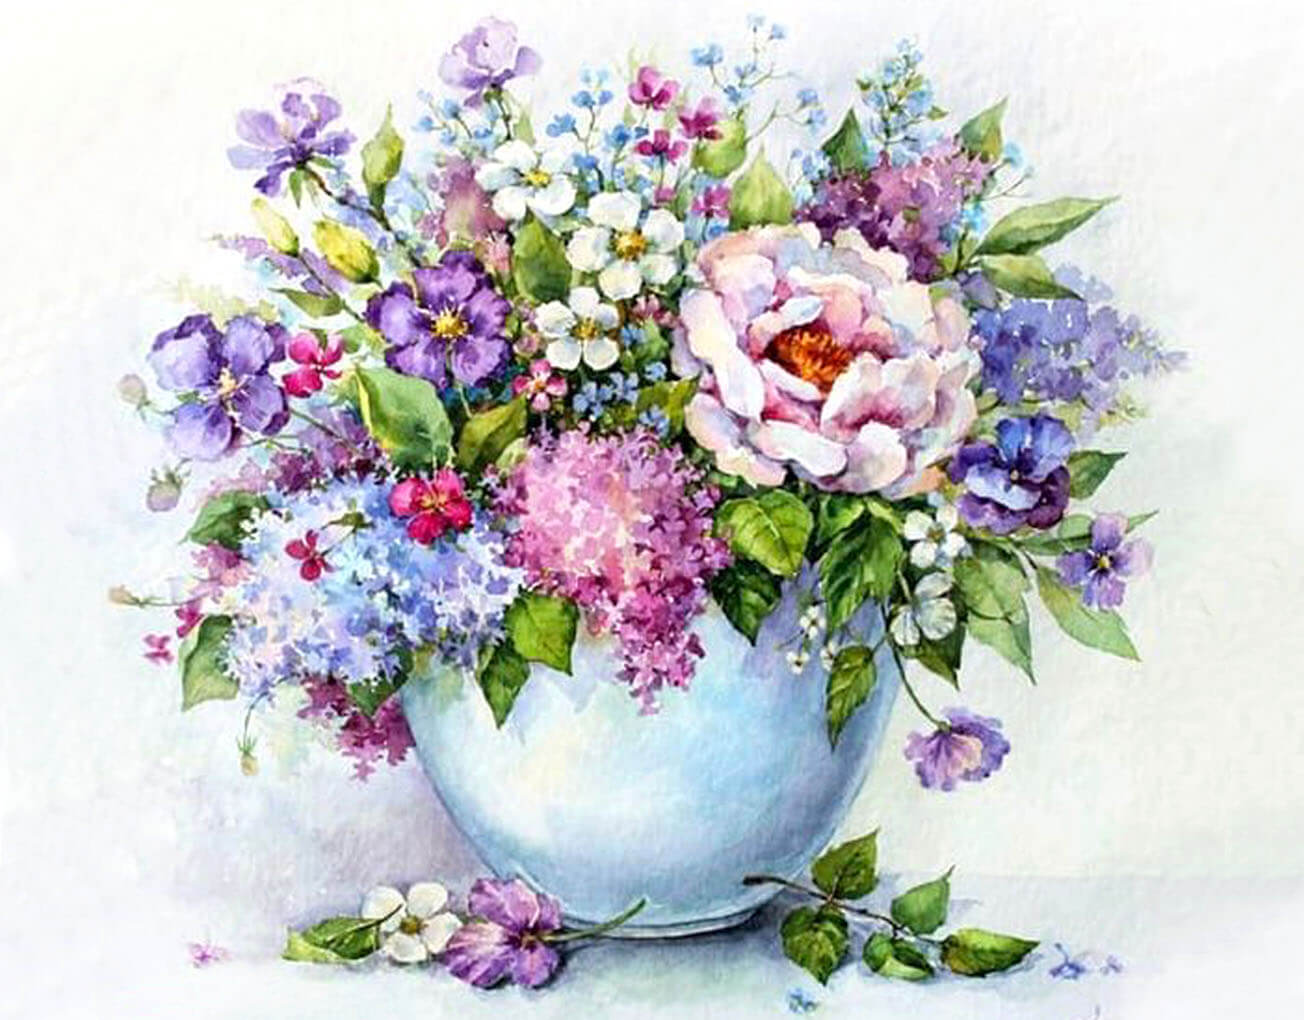 Diamond painting - LG147e - Delicate flowers in a white vase Image 1